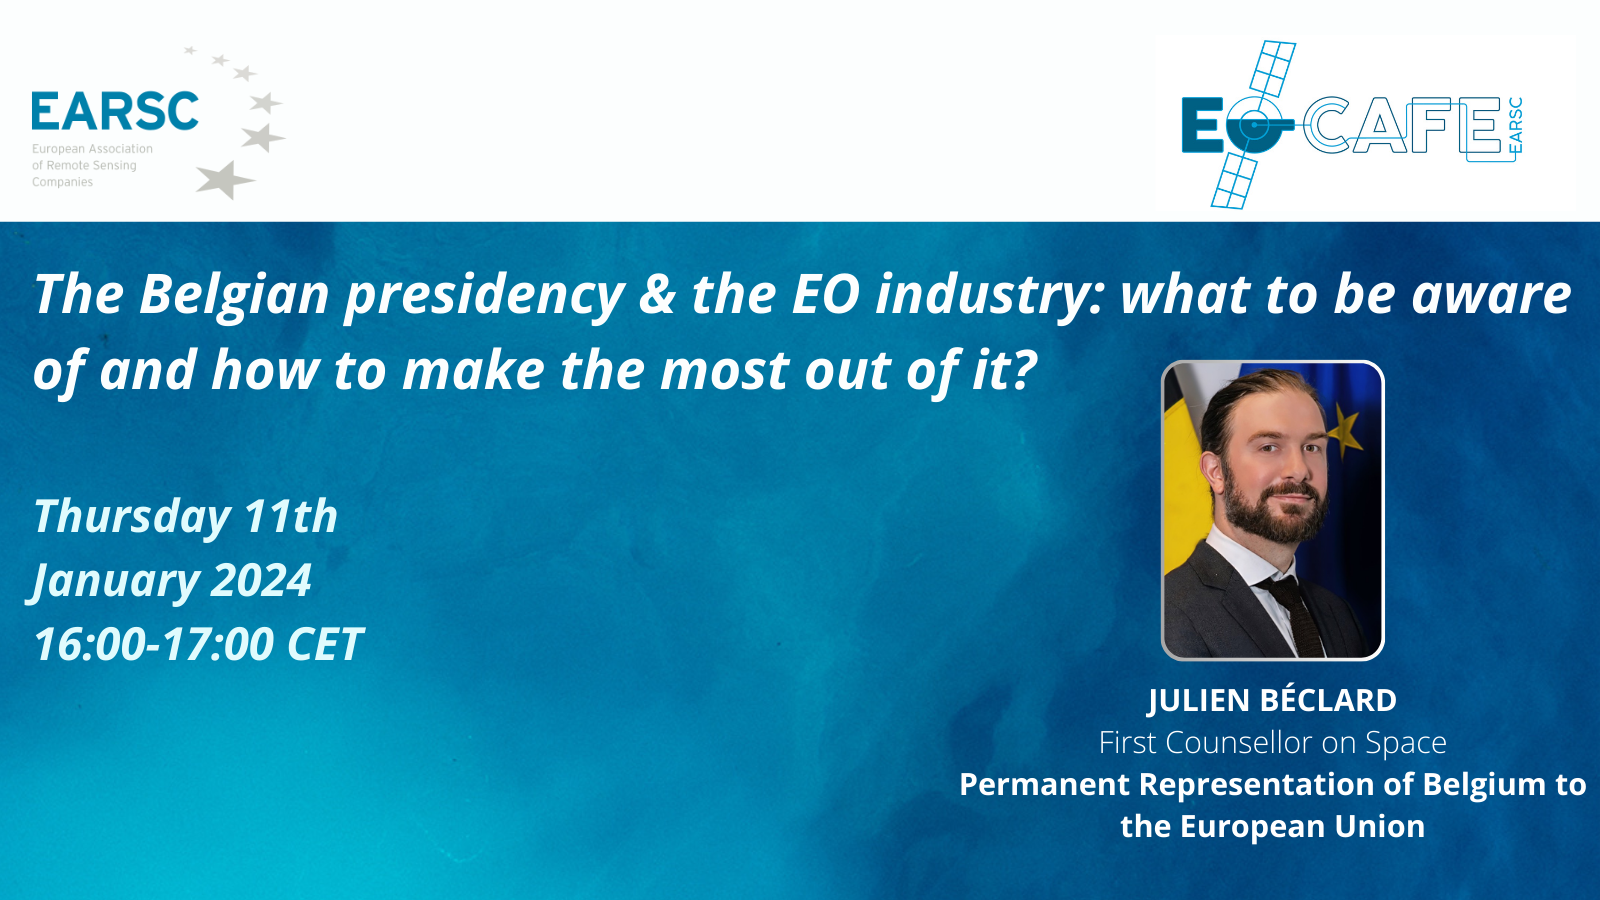 EOcafe: The Belgian presidency & the EO industry: what to be aware of and how to make the most out of it?